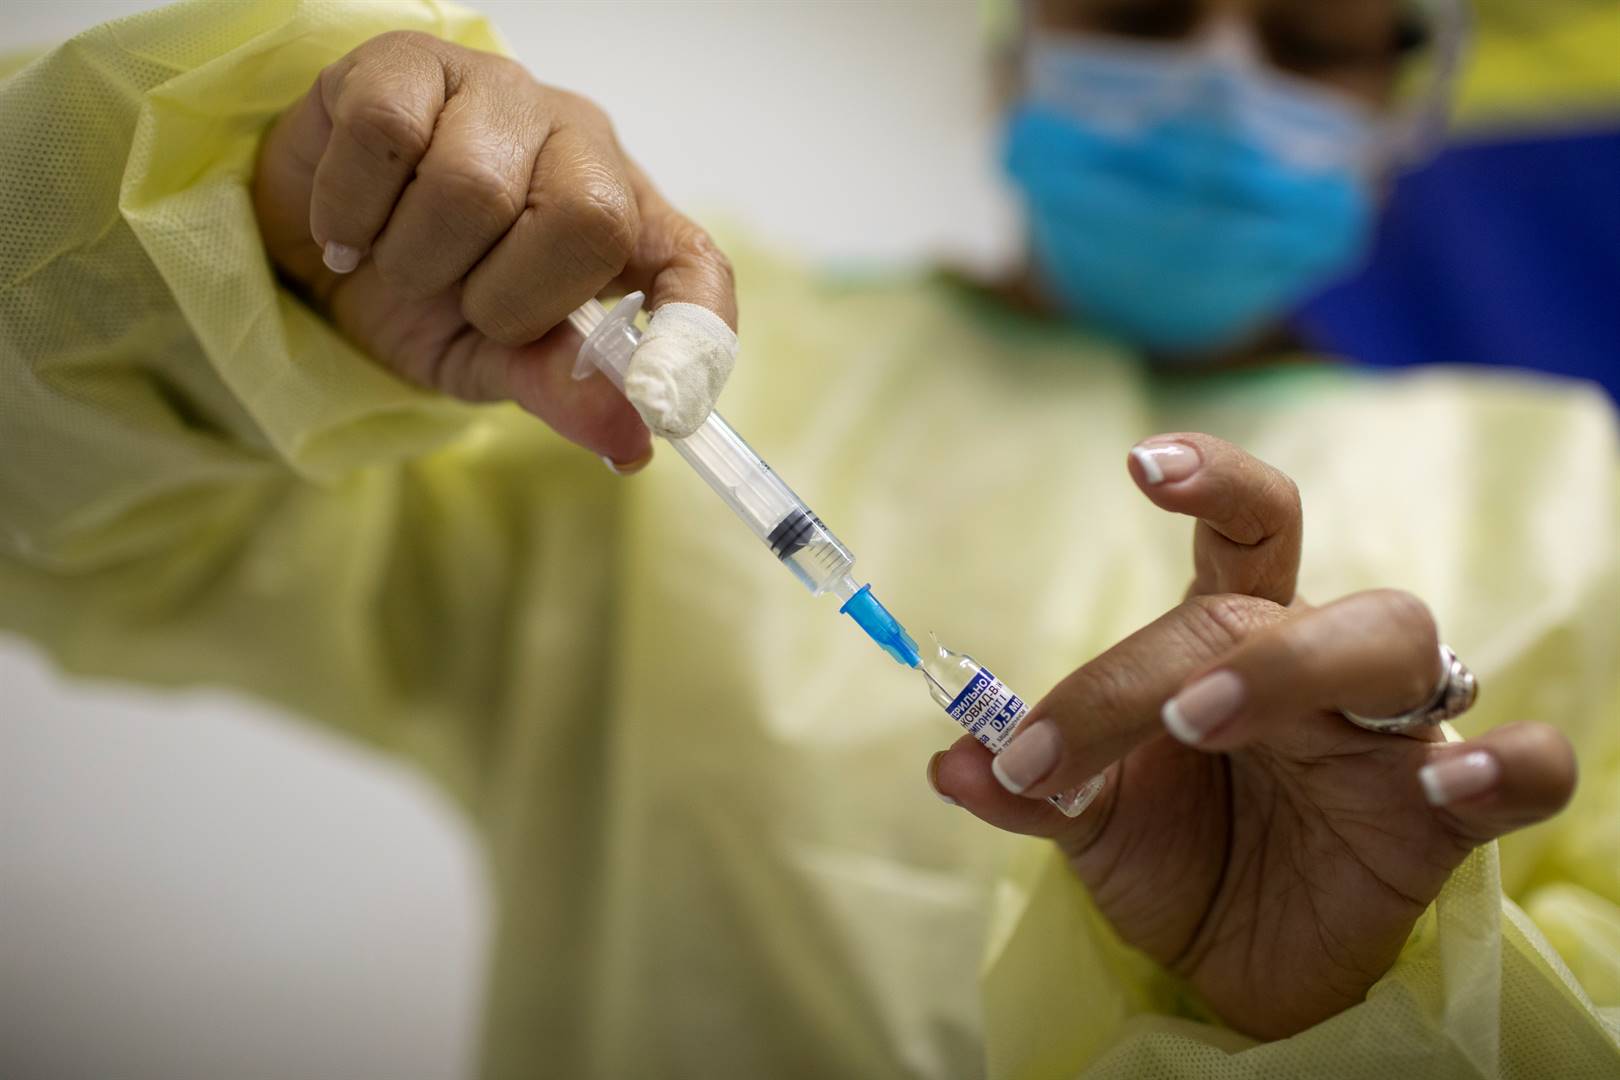 A medical worker fills a syringe with a vaccine against Covid-19.